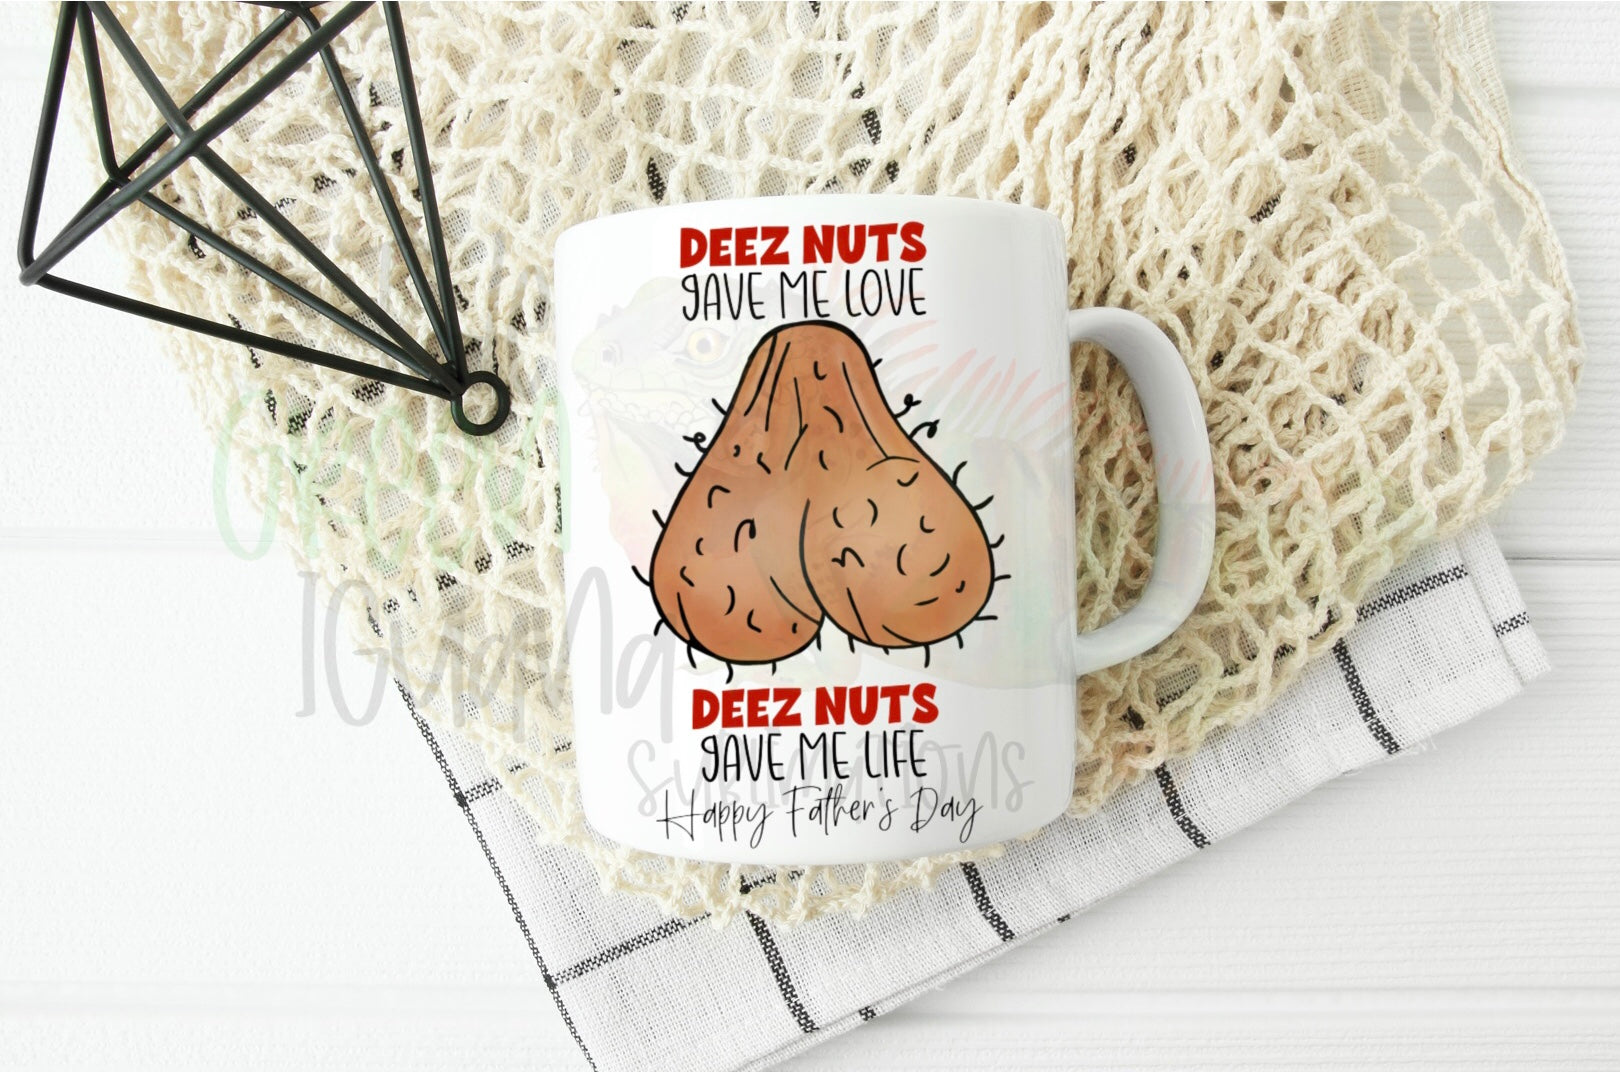 Deez nuts gave me love, deez nuts gave me life. Happy Father’s Day - DIGITAL